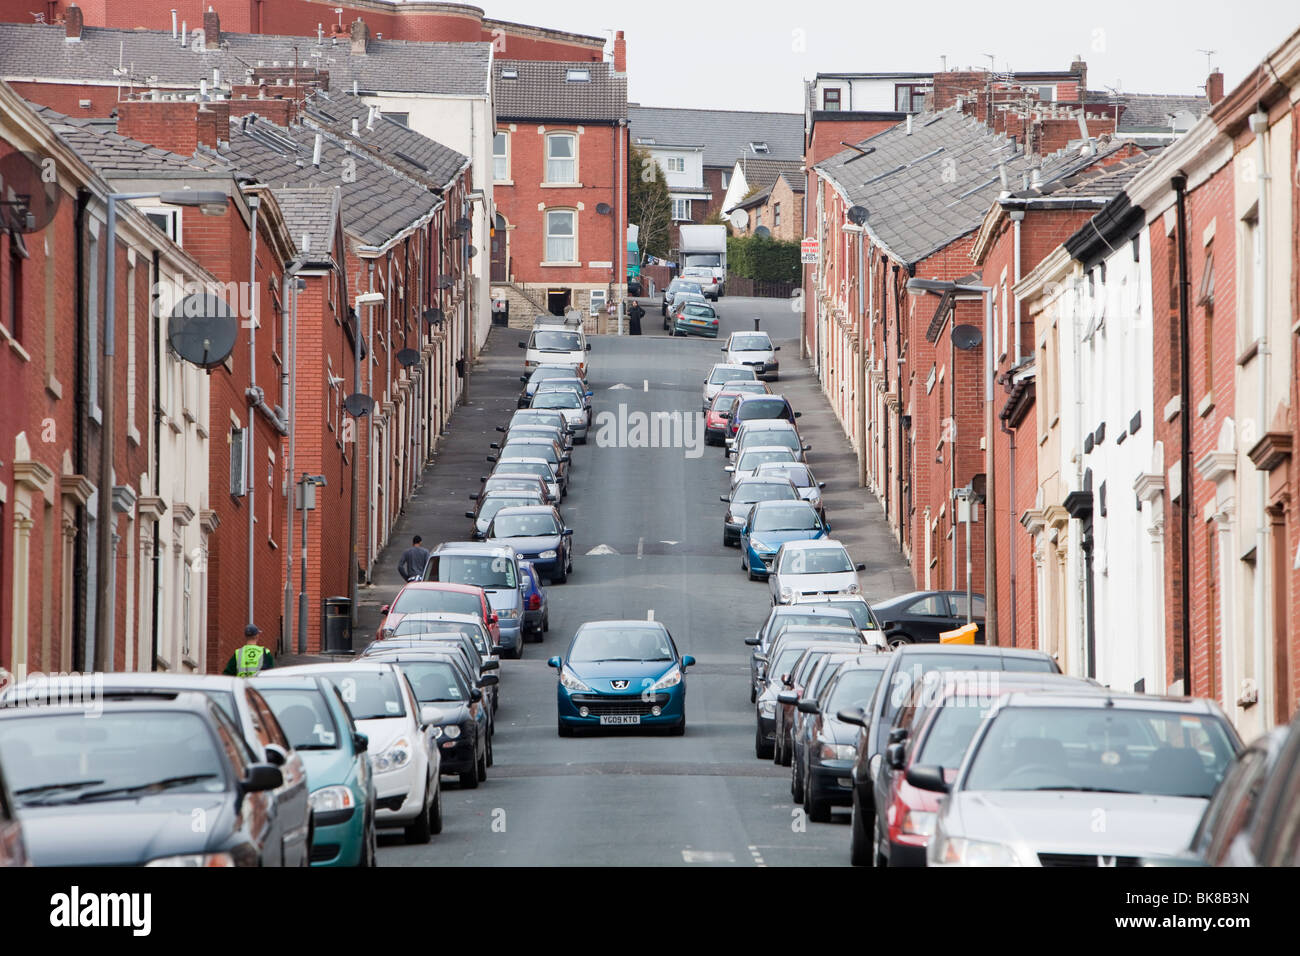 Cars parked on the street in a muslim area of Blackburn, Lancashire, UK, Stock Photo